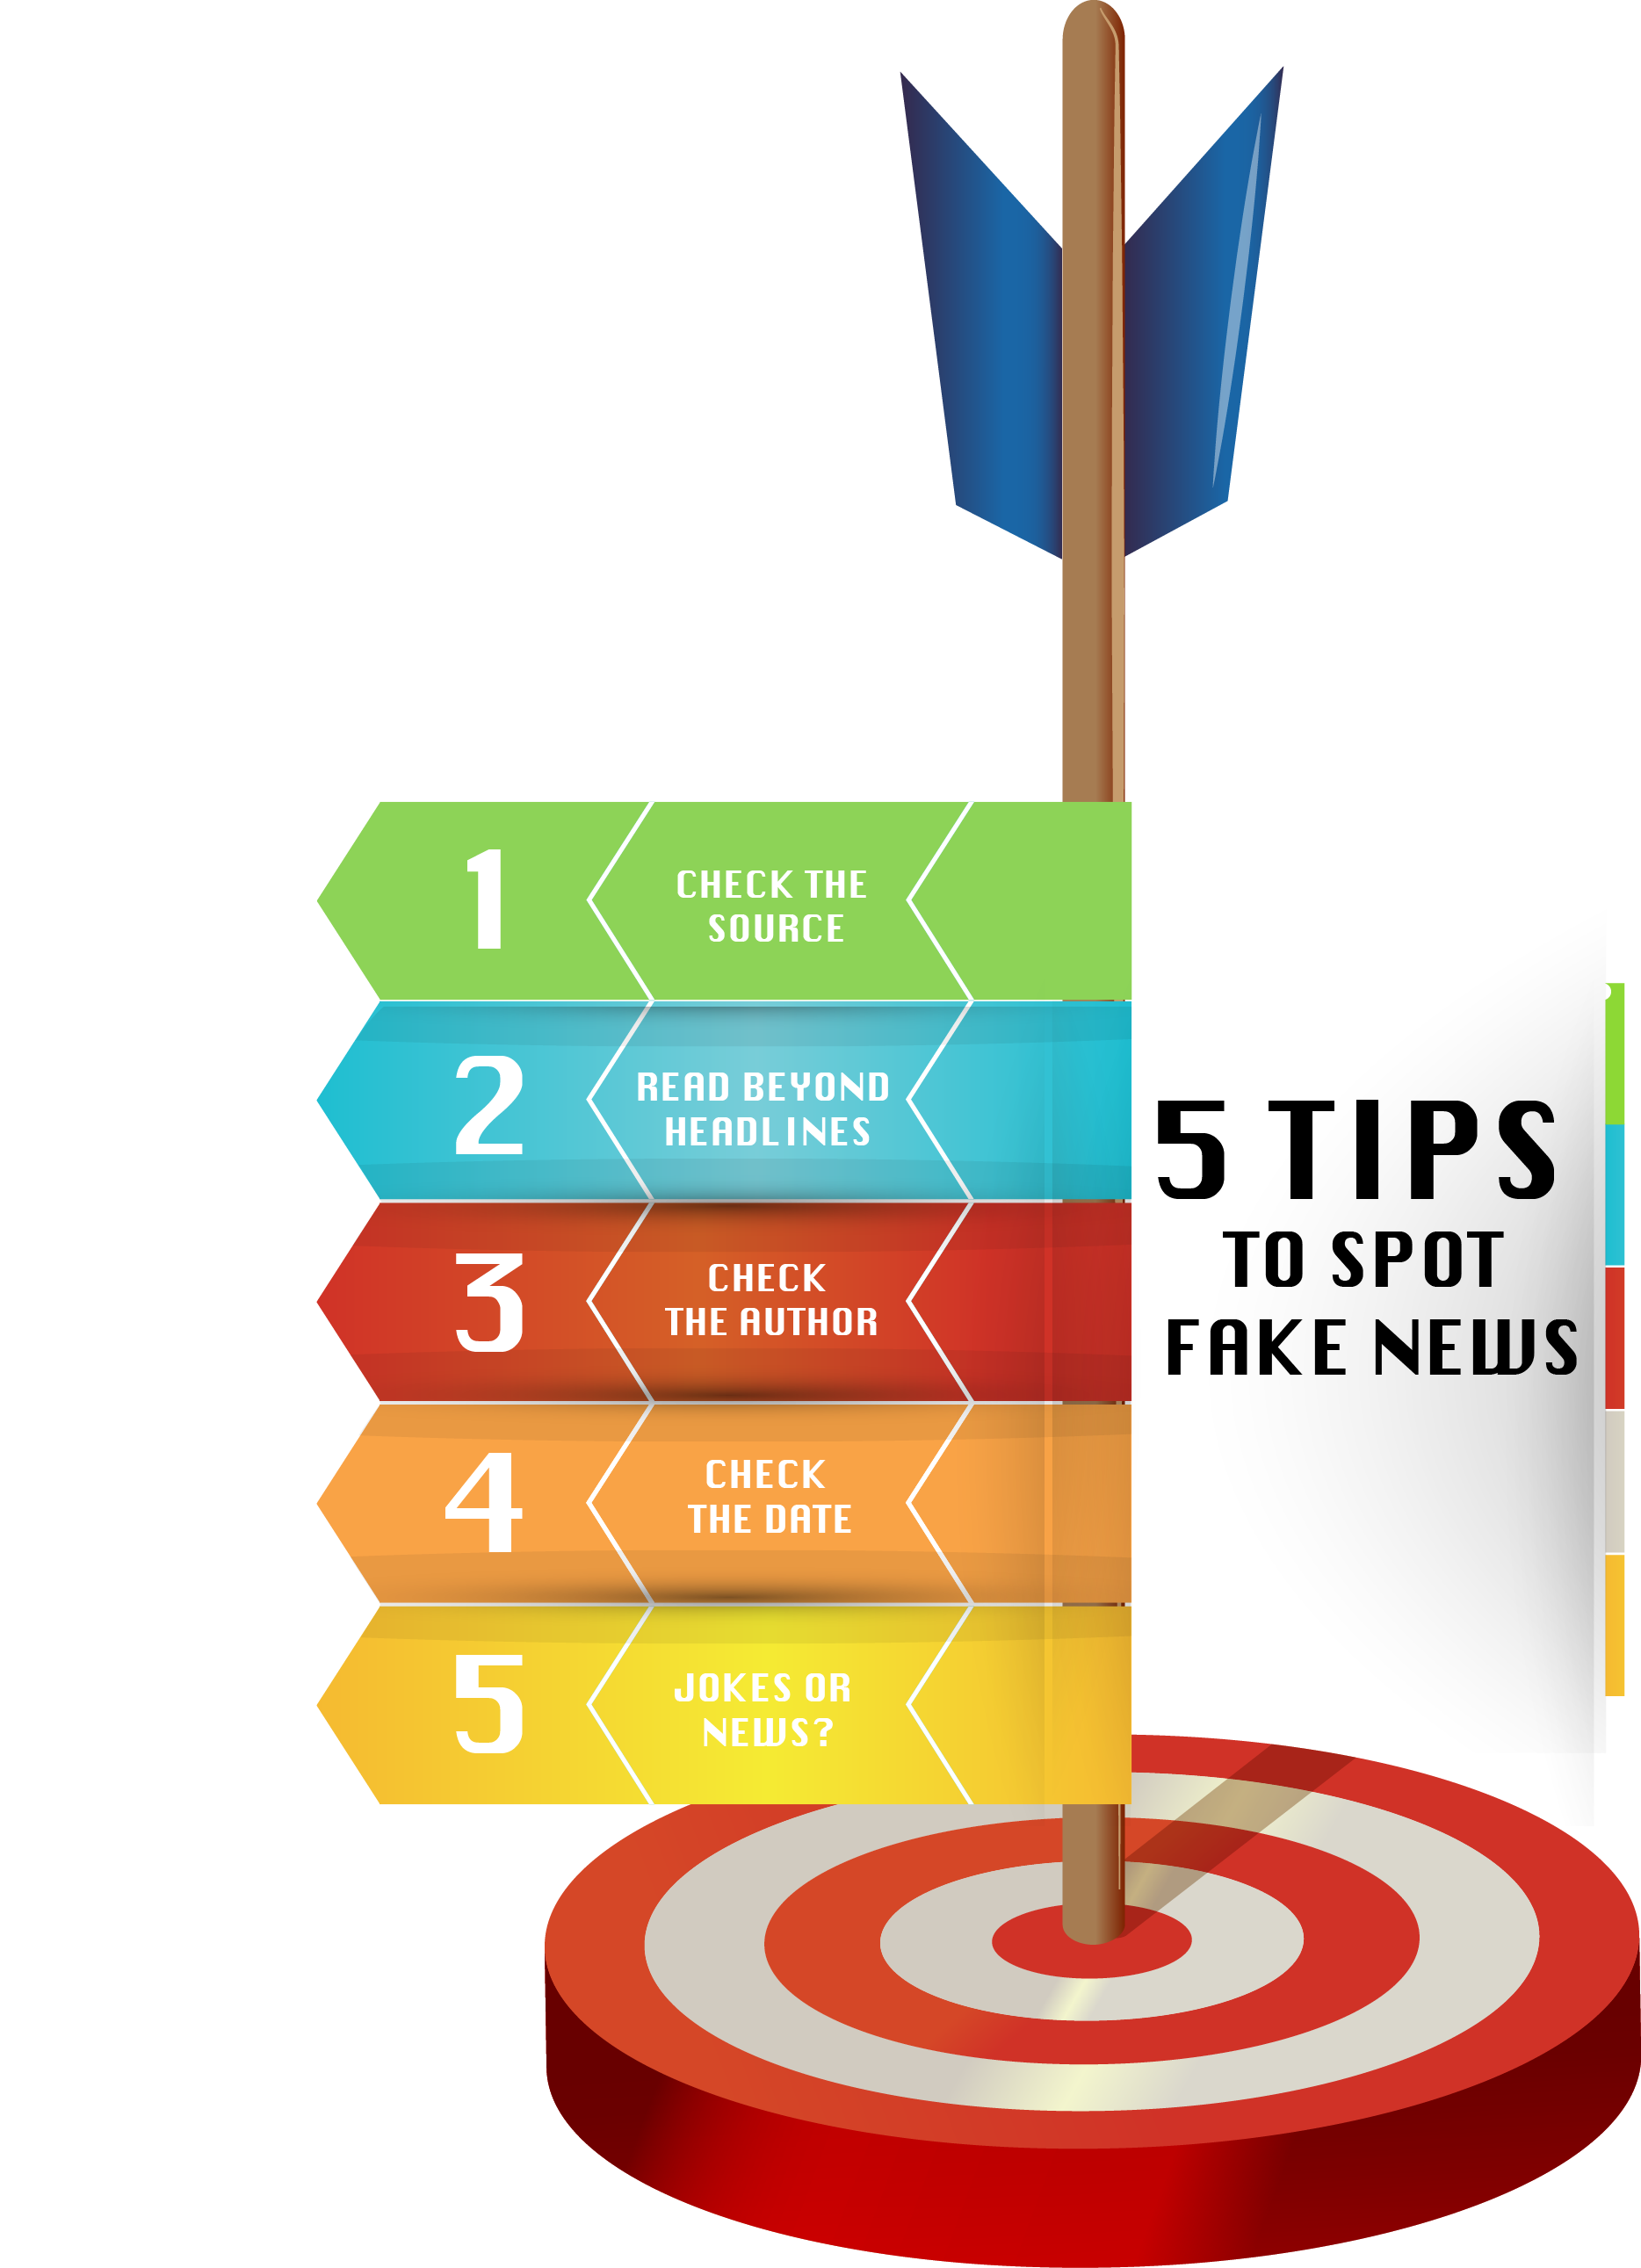 5 Tips To Spot Fake News – Illustration With Infographics